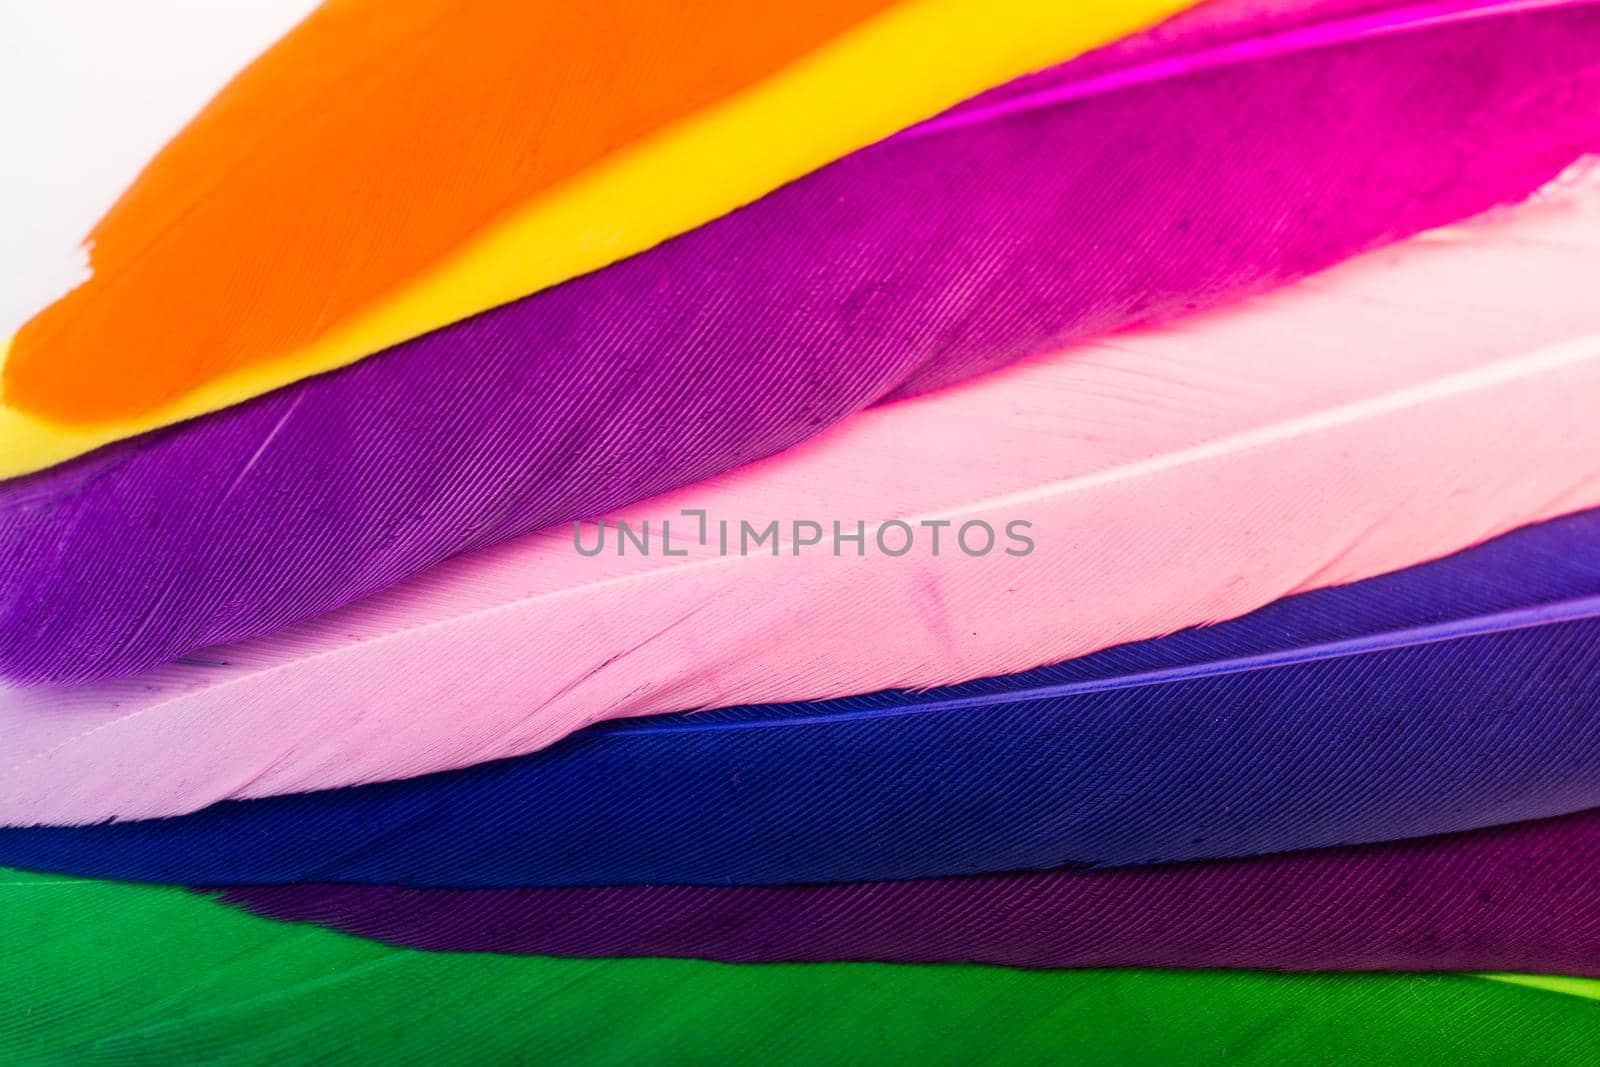  Studio shot photo colored bird feathers as texture background  by berkay